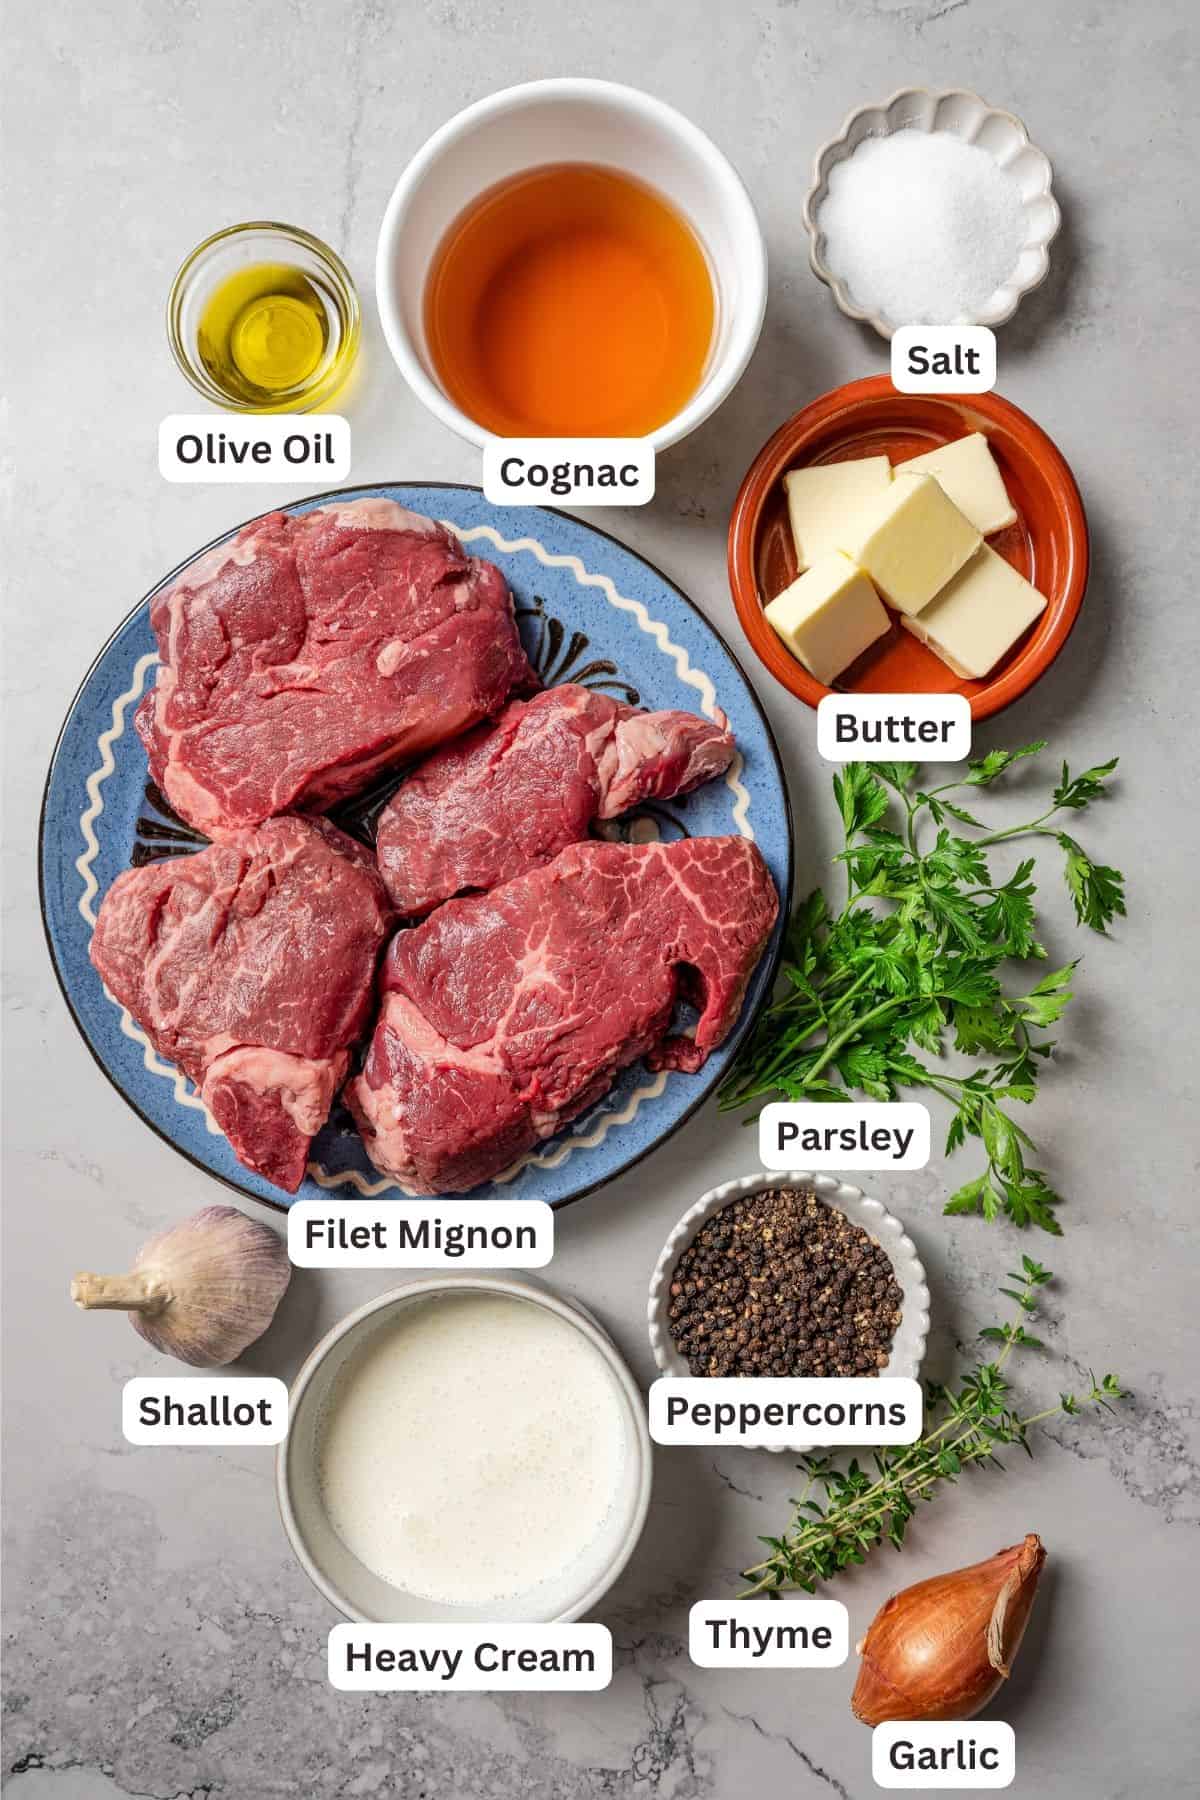 Steak au poivre ingredients with text labels overlaying each ingredient.